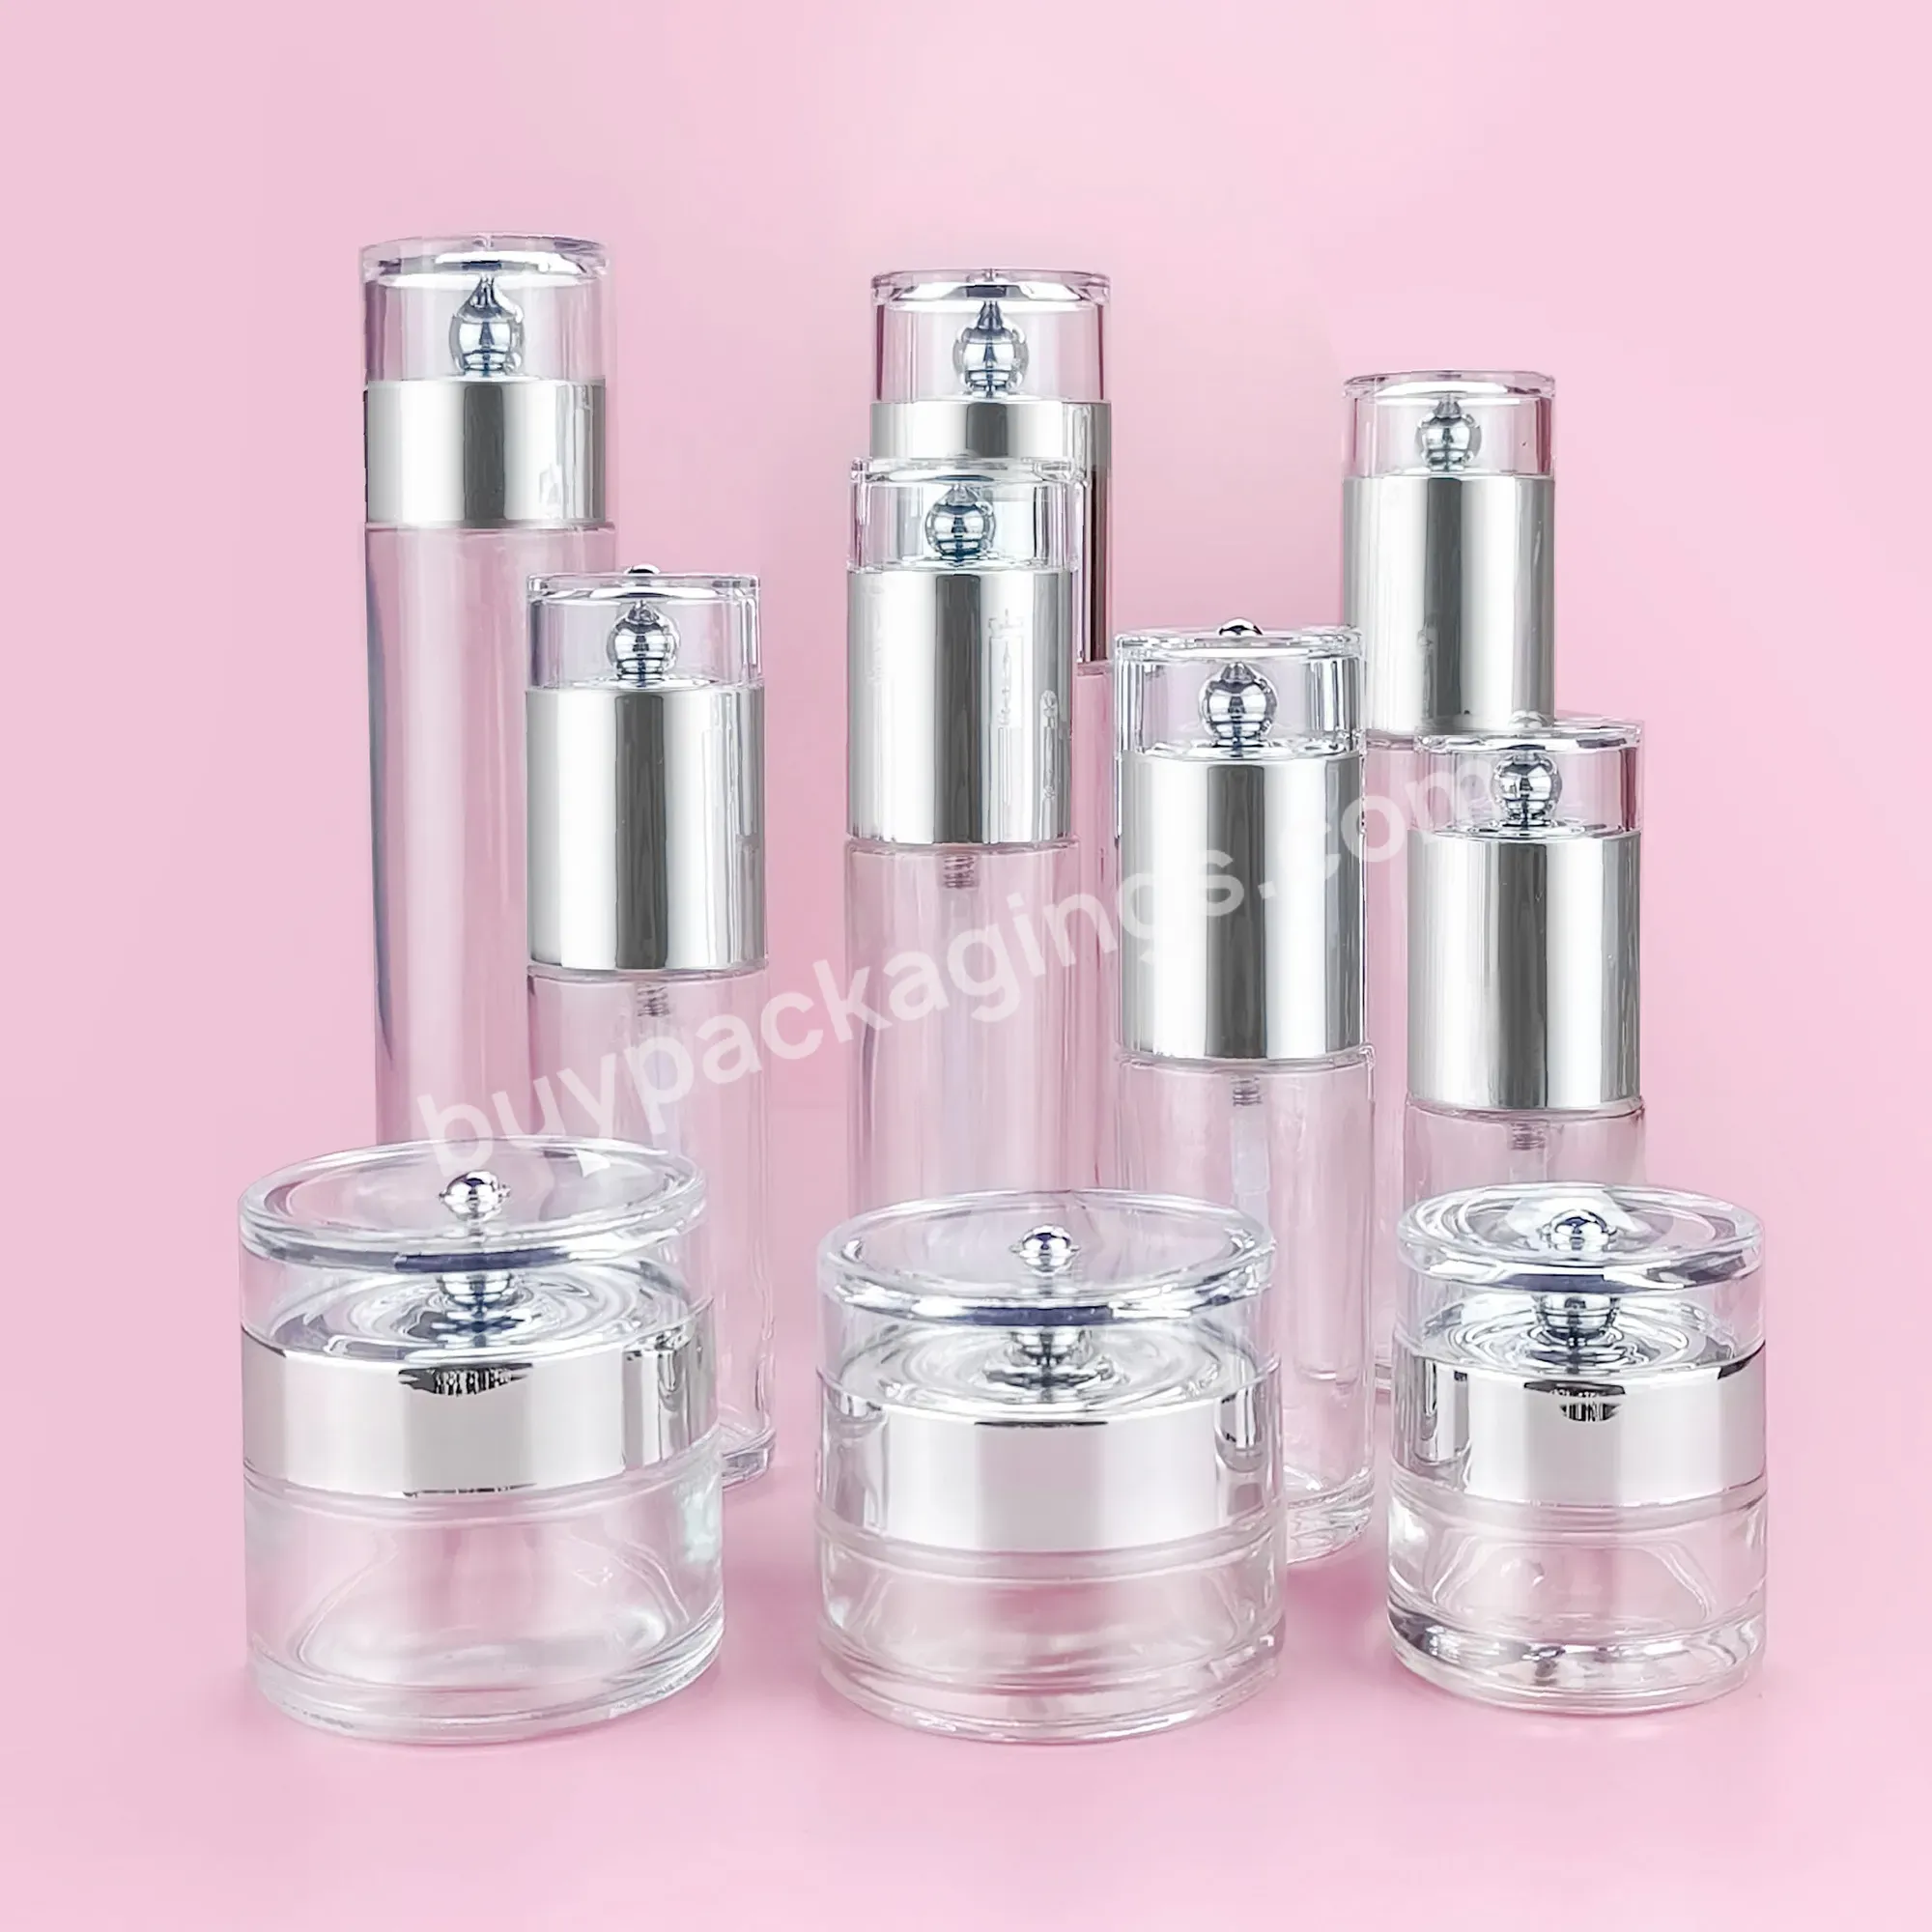 Luxury 1oz 2oz 3oz Empty Round Matte Clear Cosmetic Face Lotion Cream Glass Bottle Jar Package Set With Spray Pump